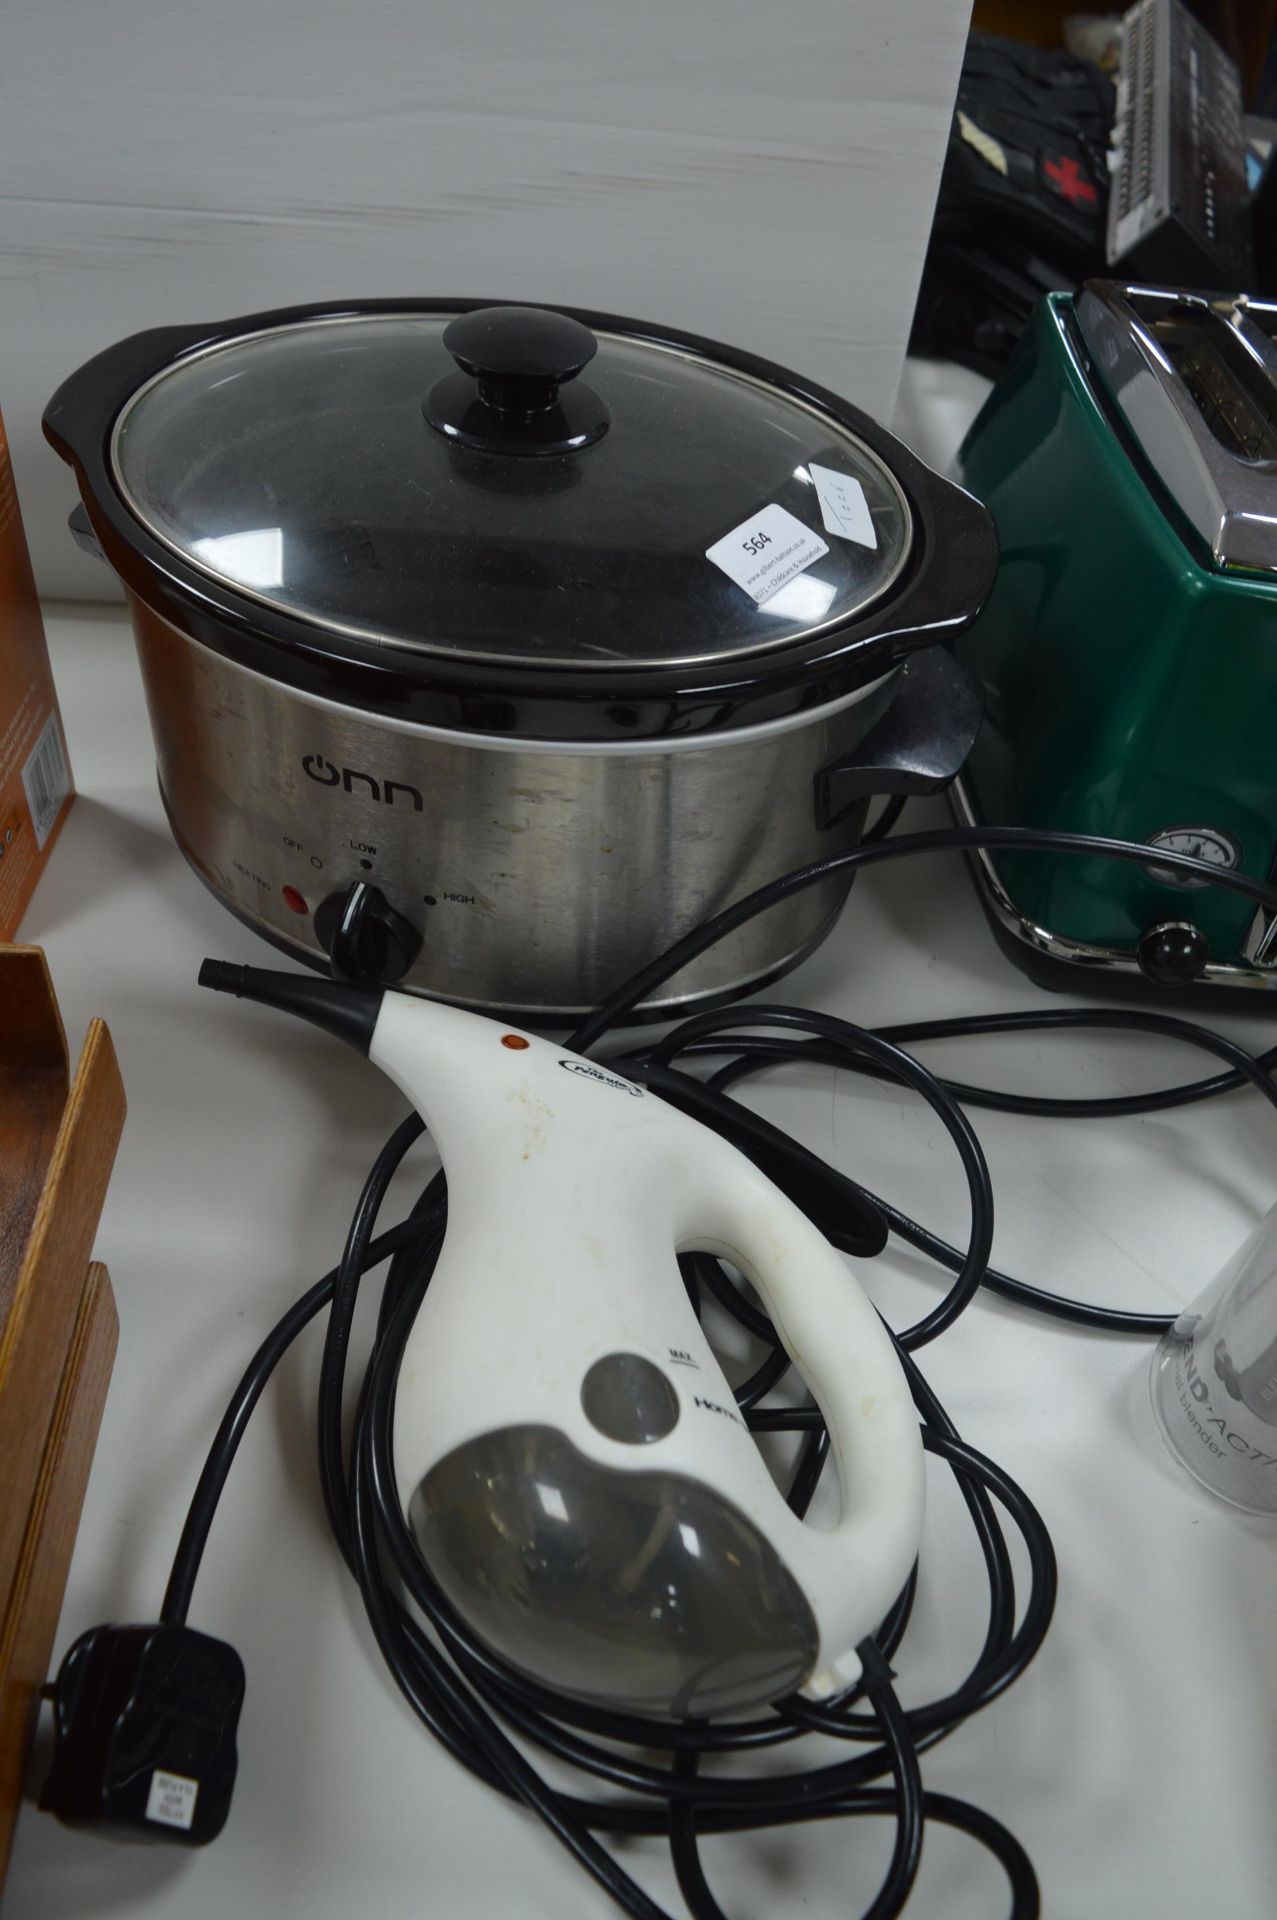 Slow Cooker and a Penguin Steamer